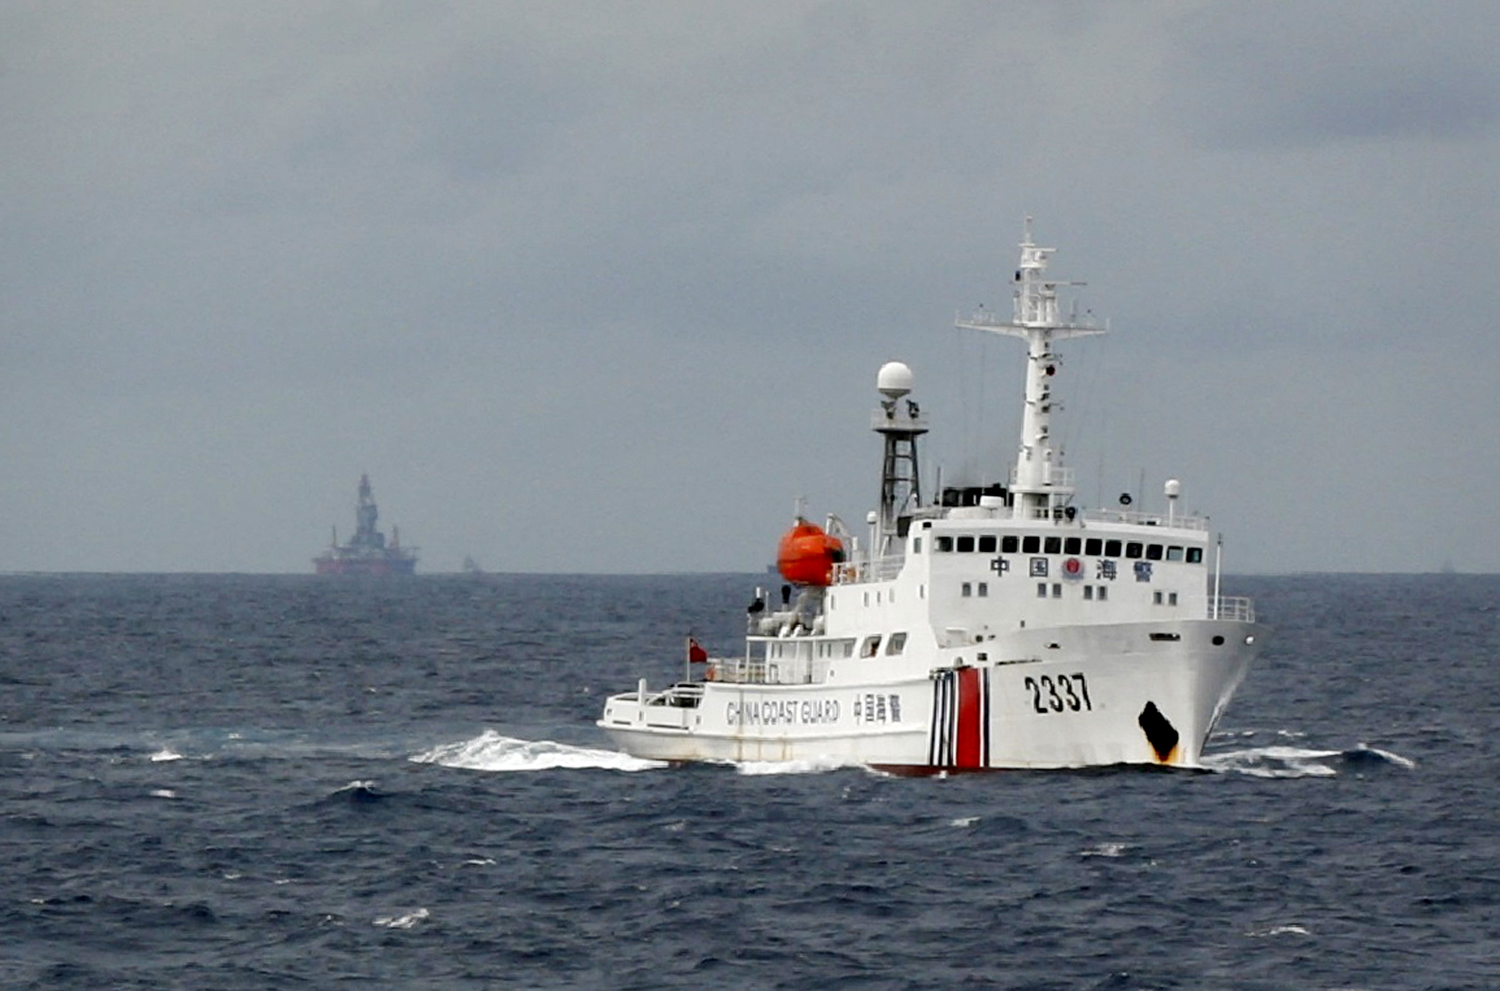 A Chinese coast-guard vessel passes near the Chinese oil rig Haiyang Shiyou 981 in the South China Sea, about 210 km (130 miles) from the coast of Vietnam on June 13, 2014. (Reuters)